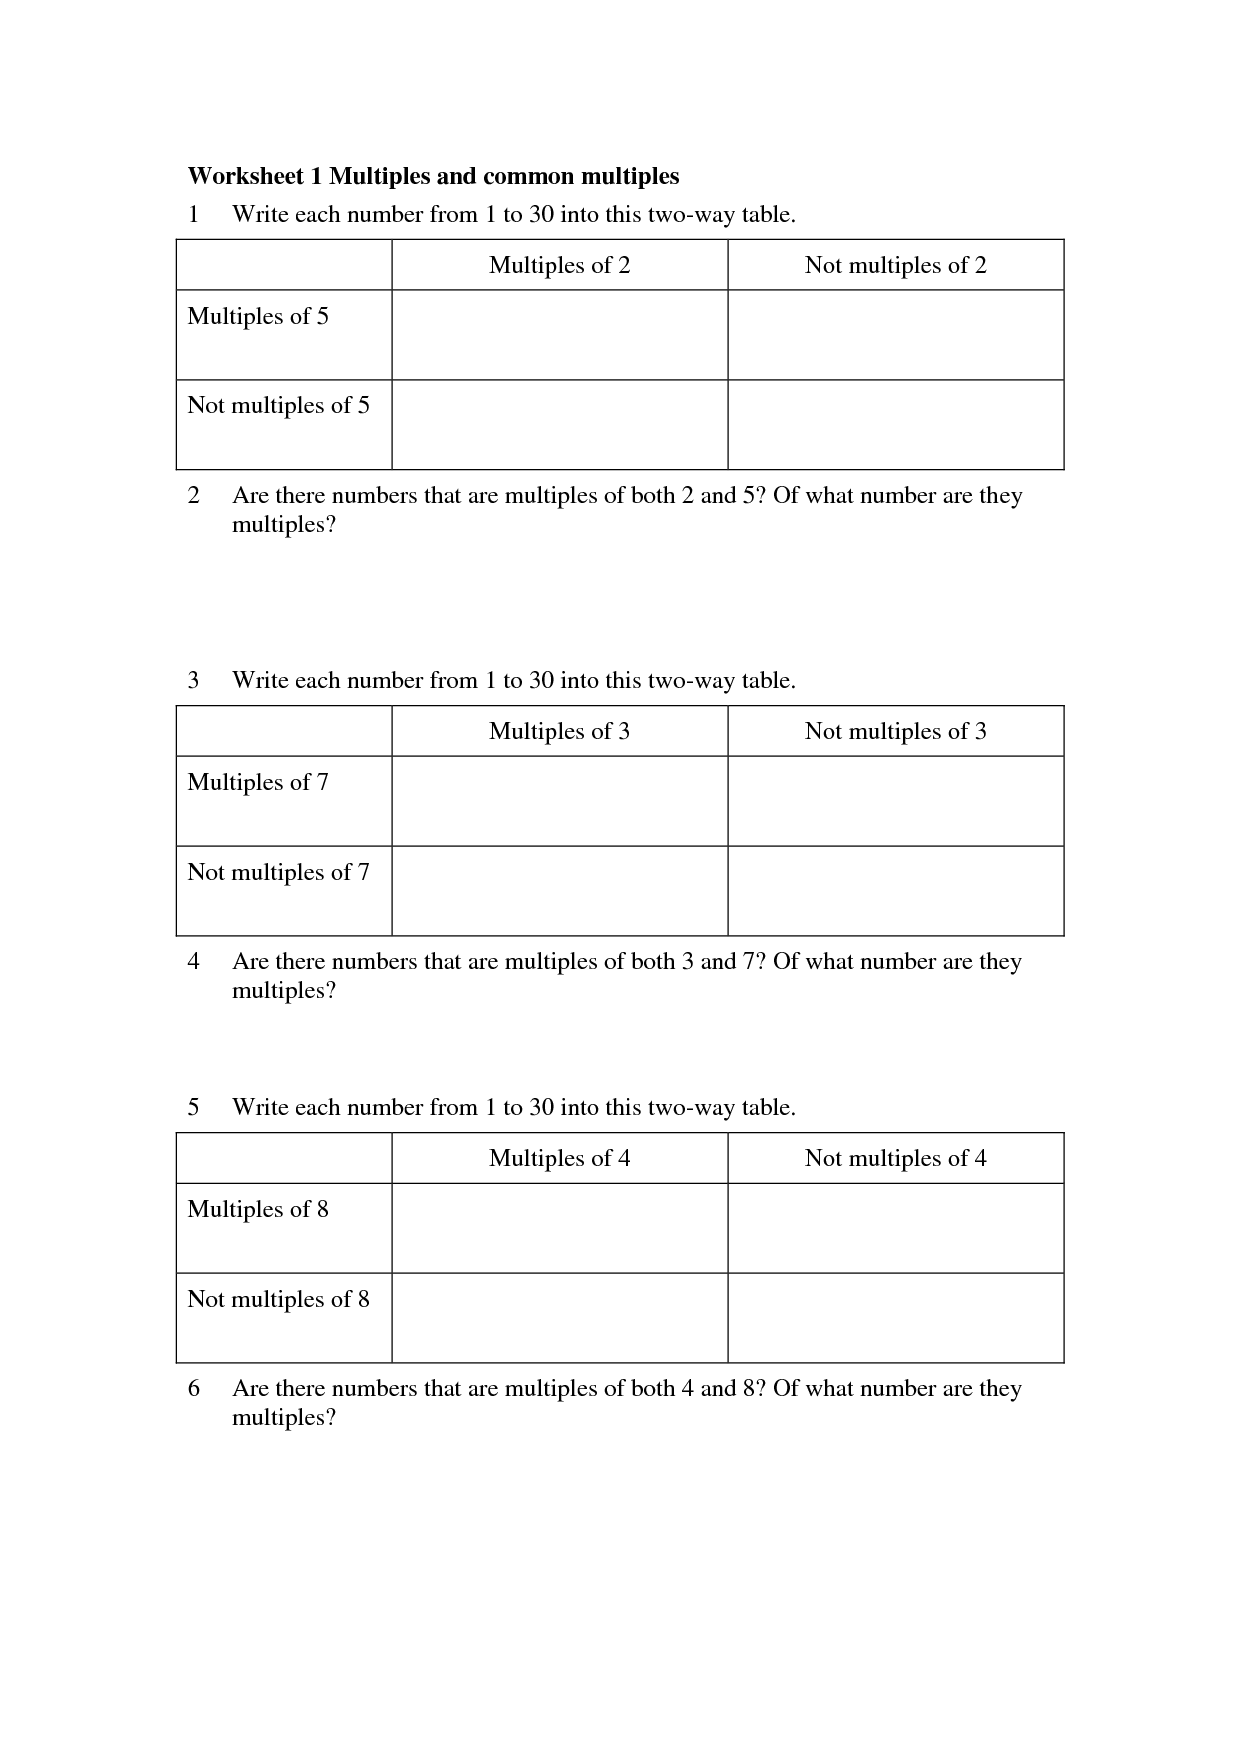 13-best-images-of-least-common-multiple-worksheet-pdf-least-common-multiple-worksheets-gcf